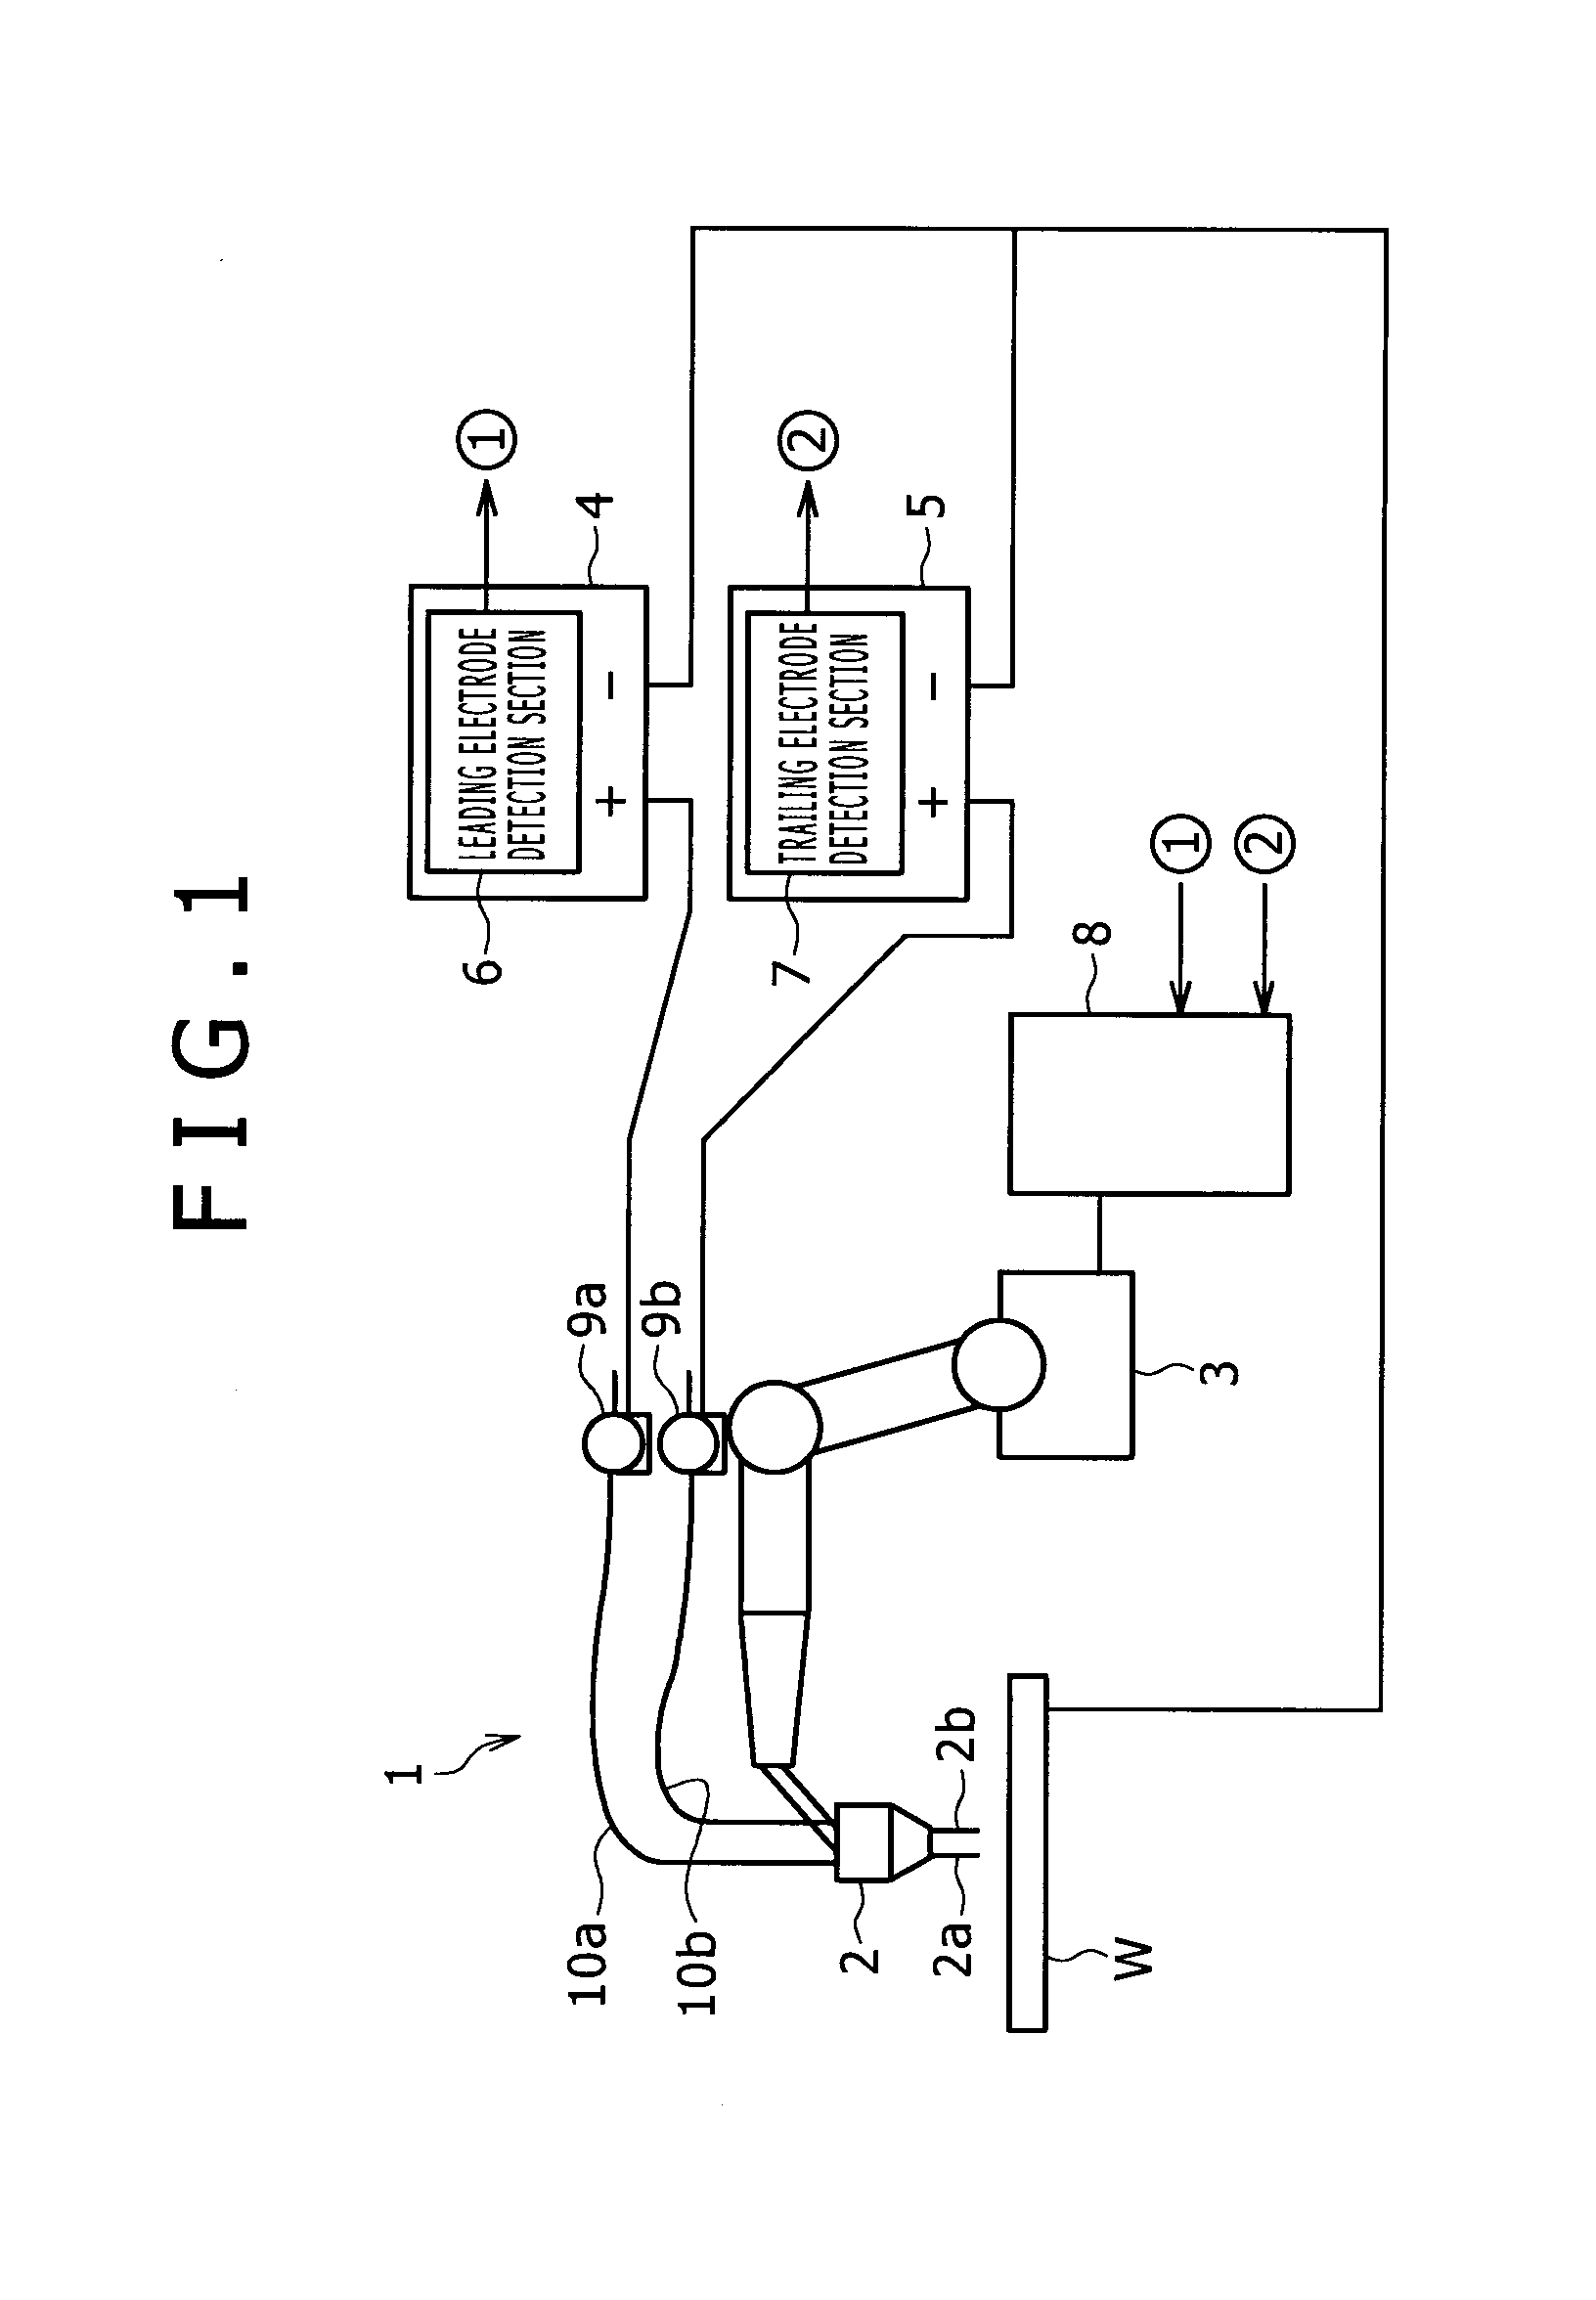 Robot control unit for controlling tandem arc welding system, and arc-sensor control method using the unit